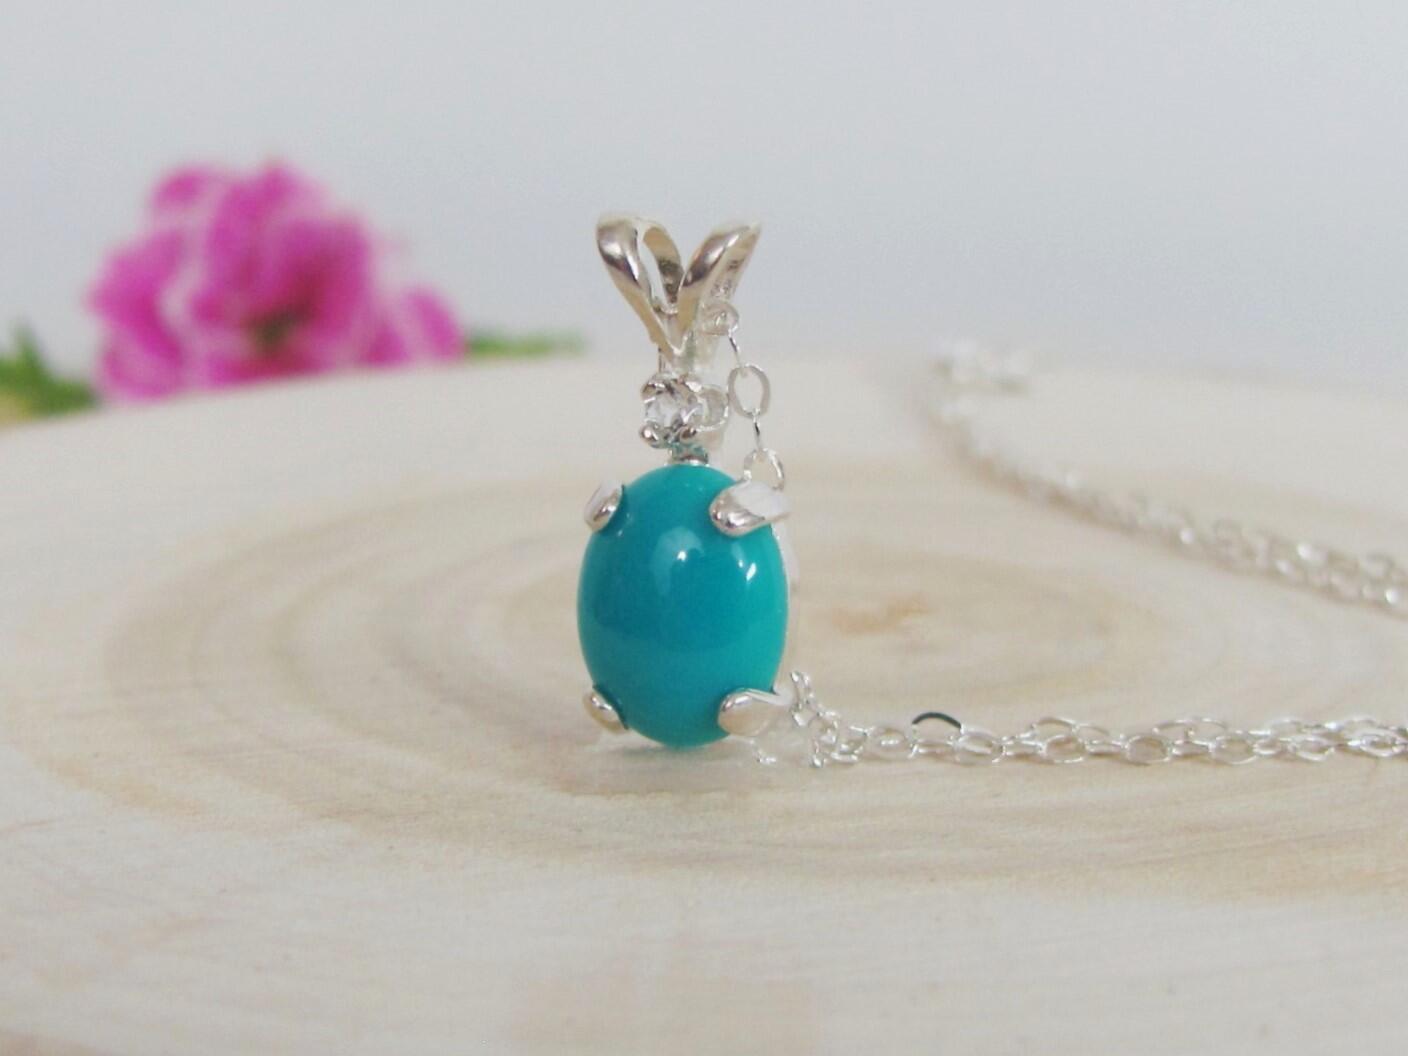 Sleeping Beauty Turquoise Oval Pendant in Sterling Silver